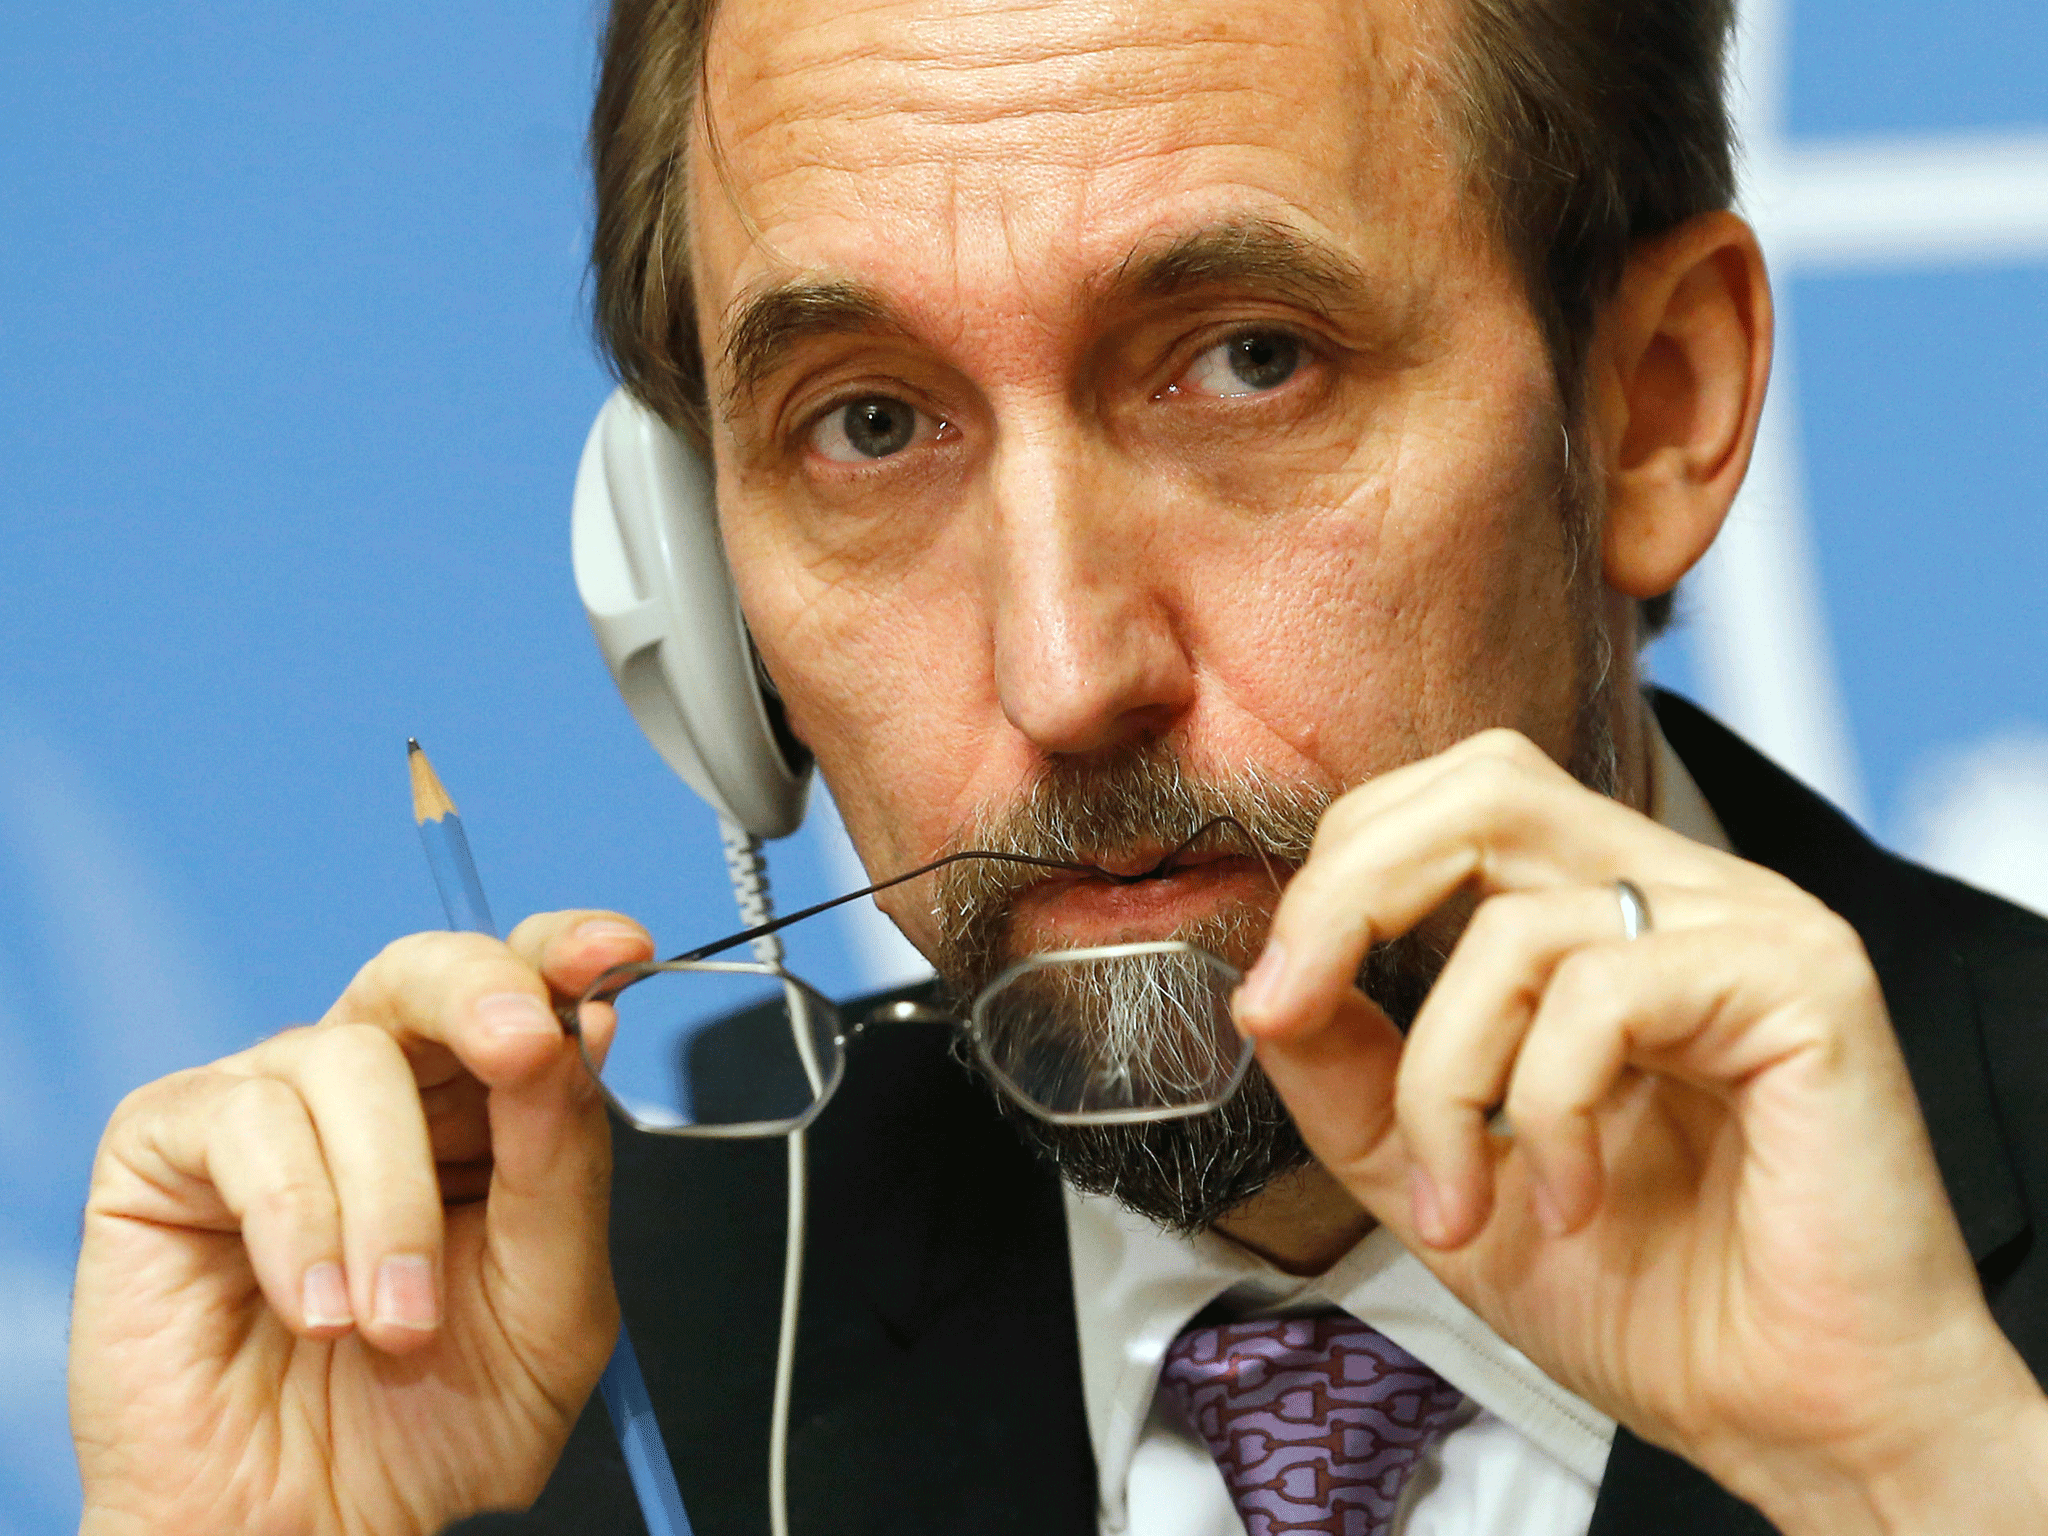 Surrey-educated Jordanian Prince Zeid, pictured at a Geneva conference in October, said 2016 was disastrous